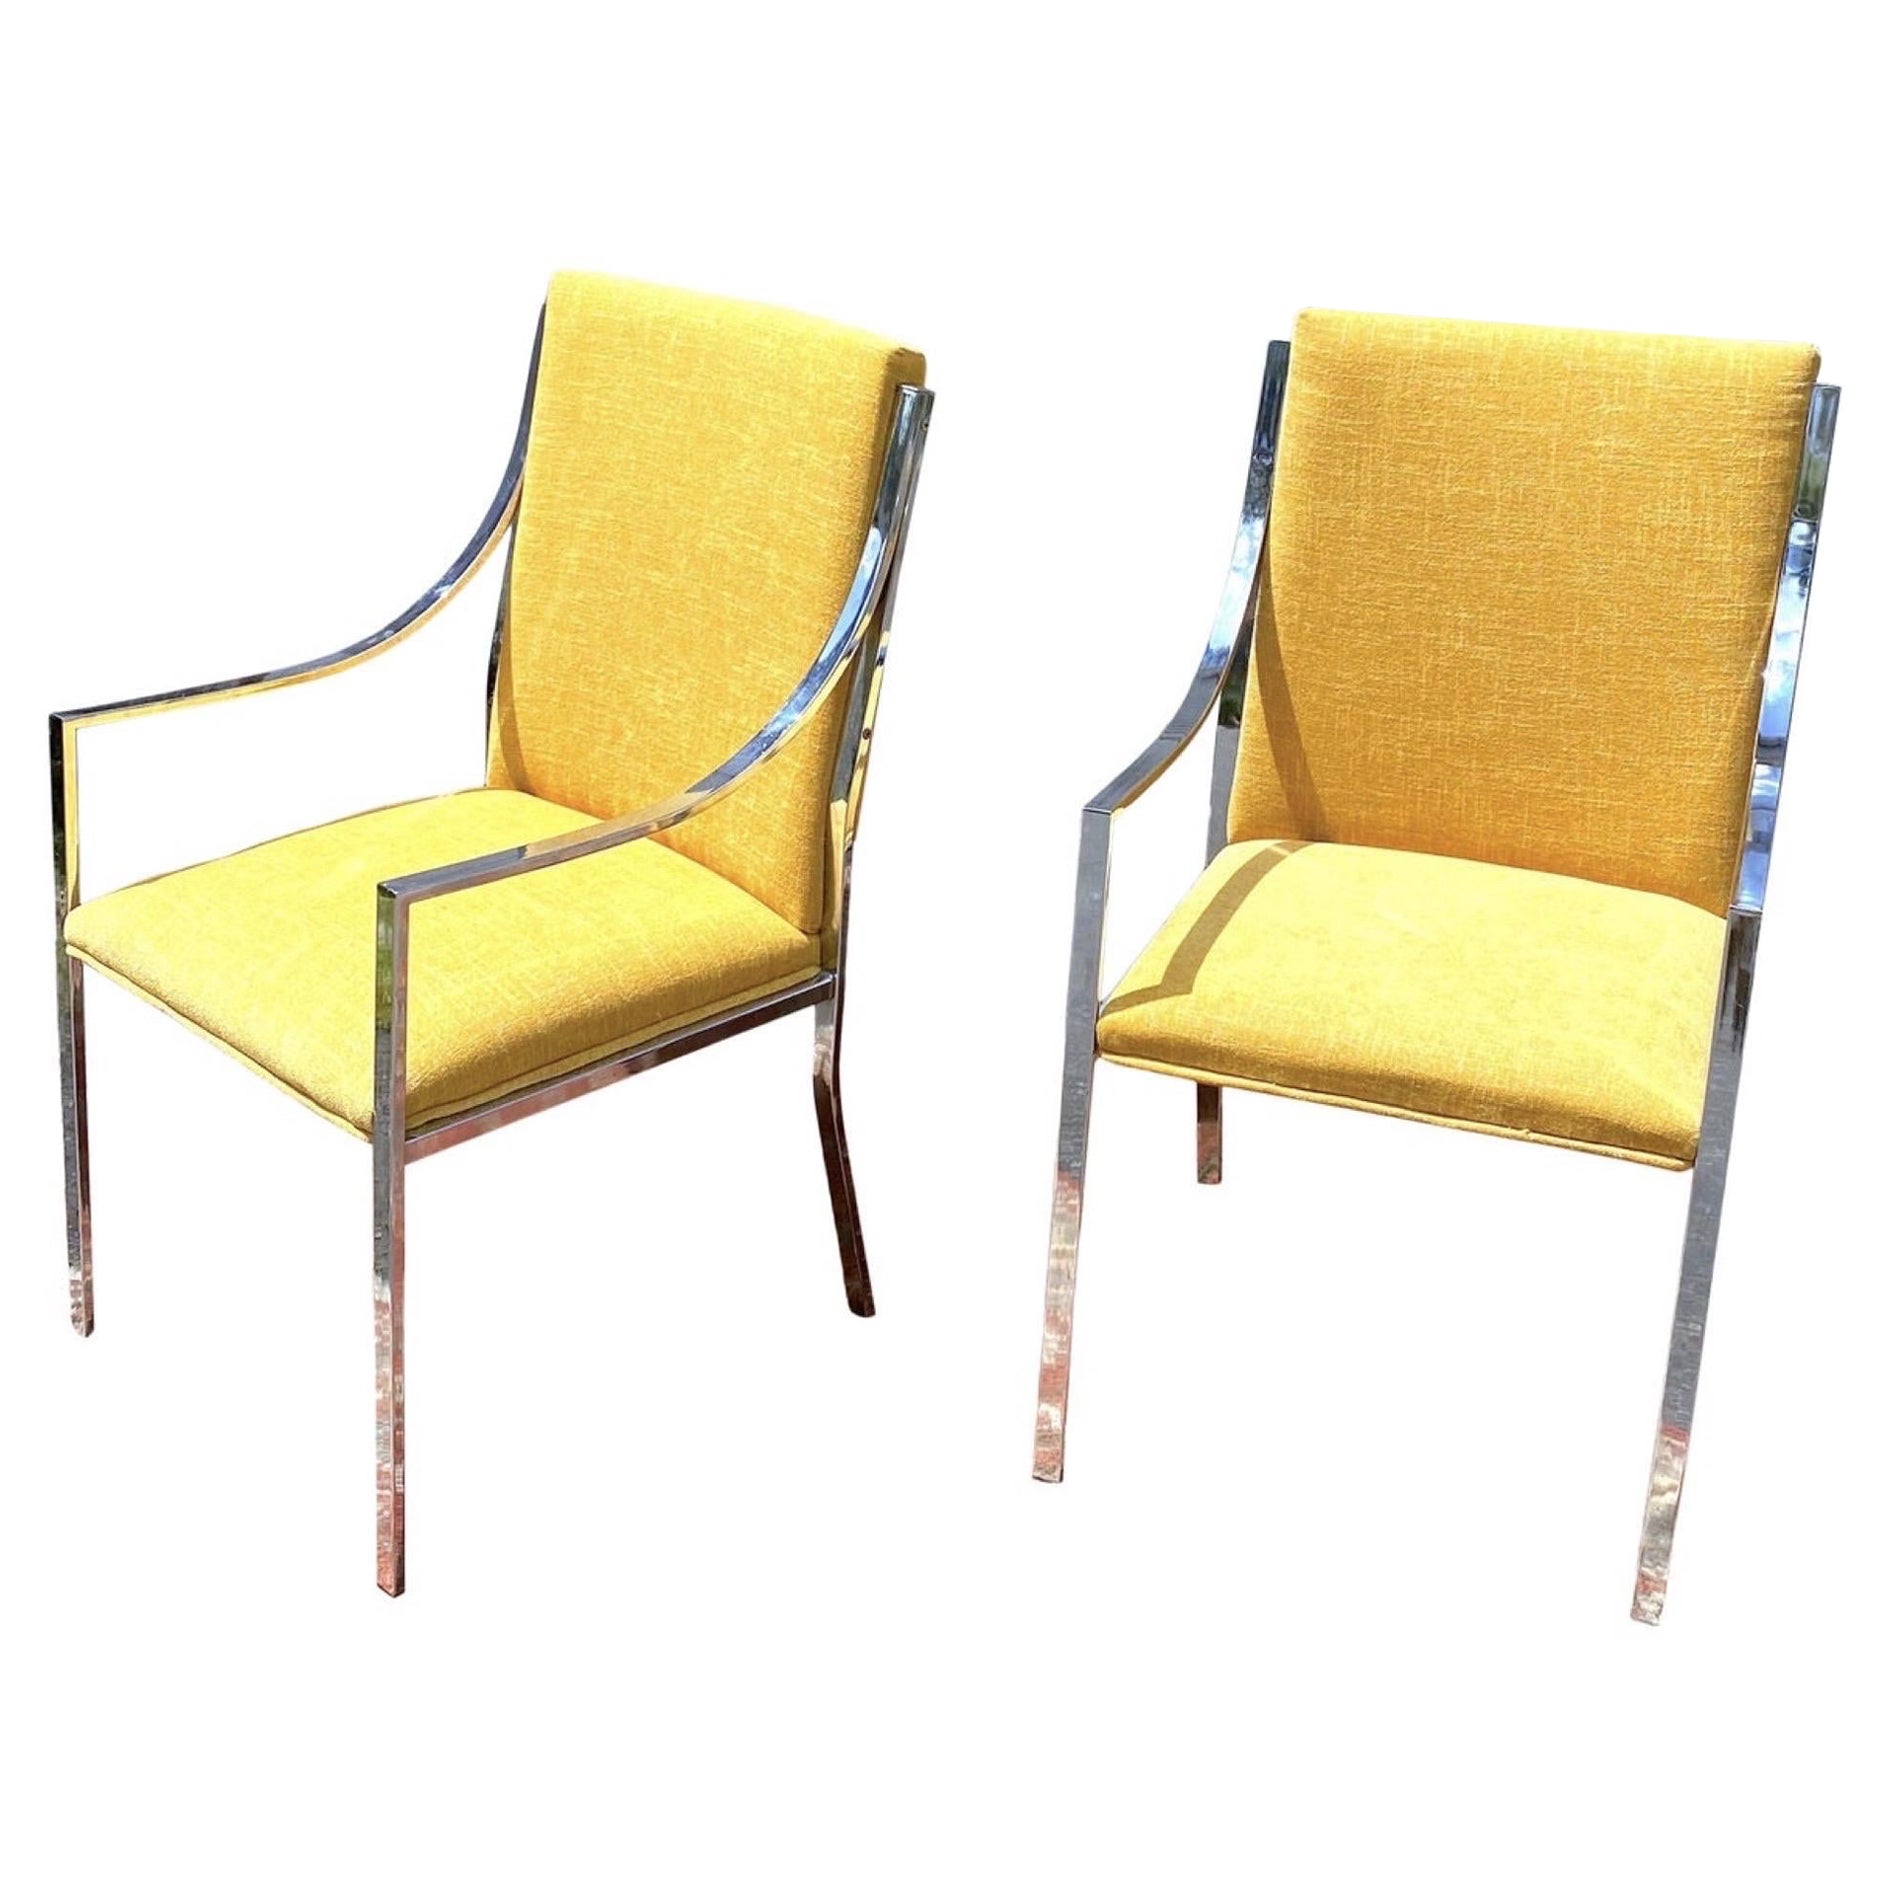 Pierre Cardin for Dillingham Chrome Occasional Chairs, Pair